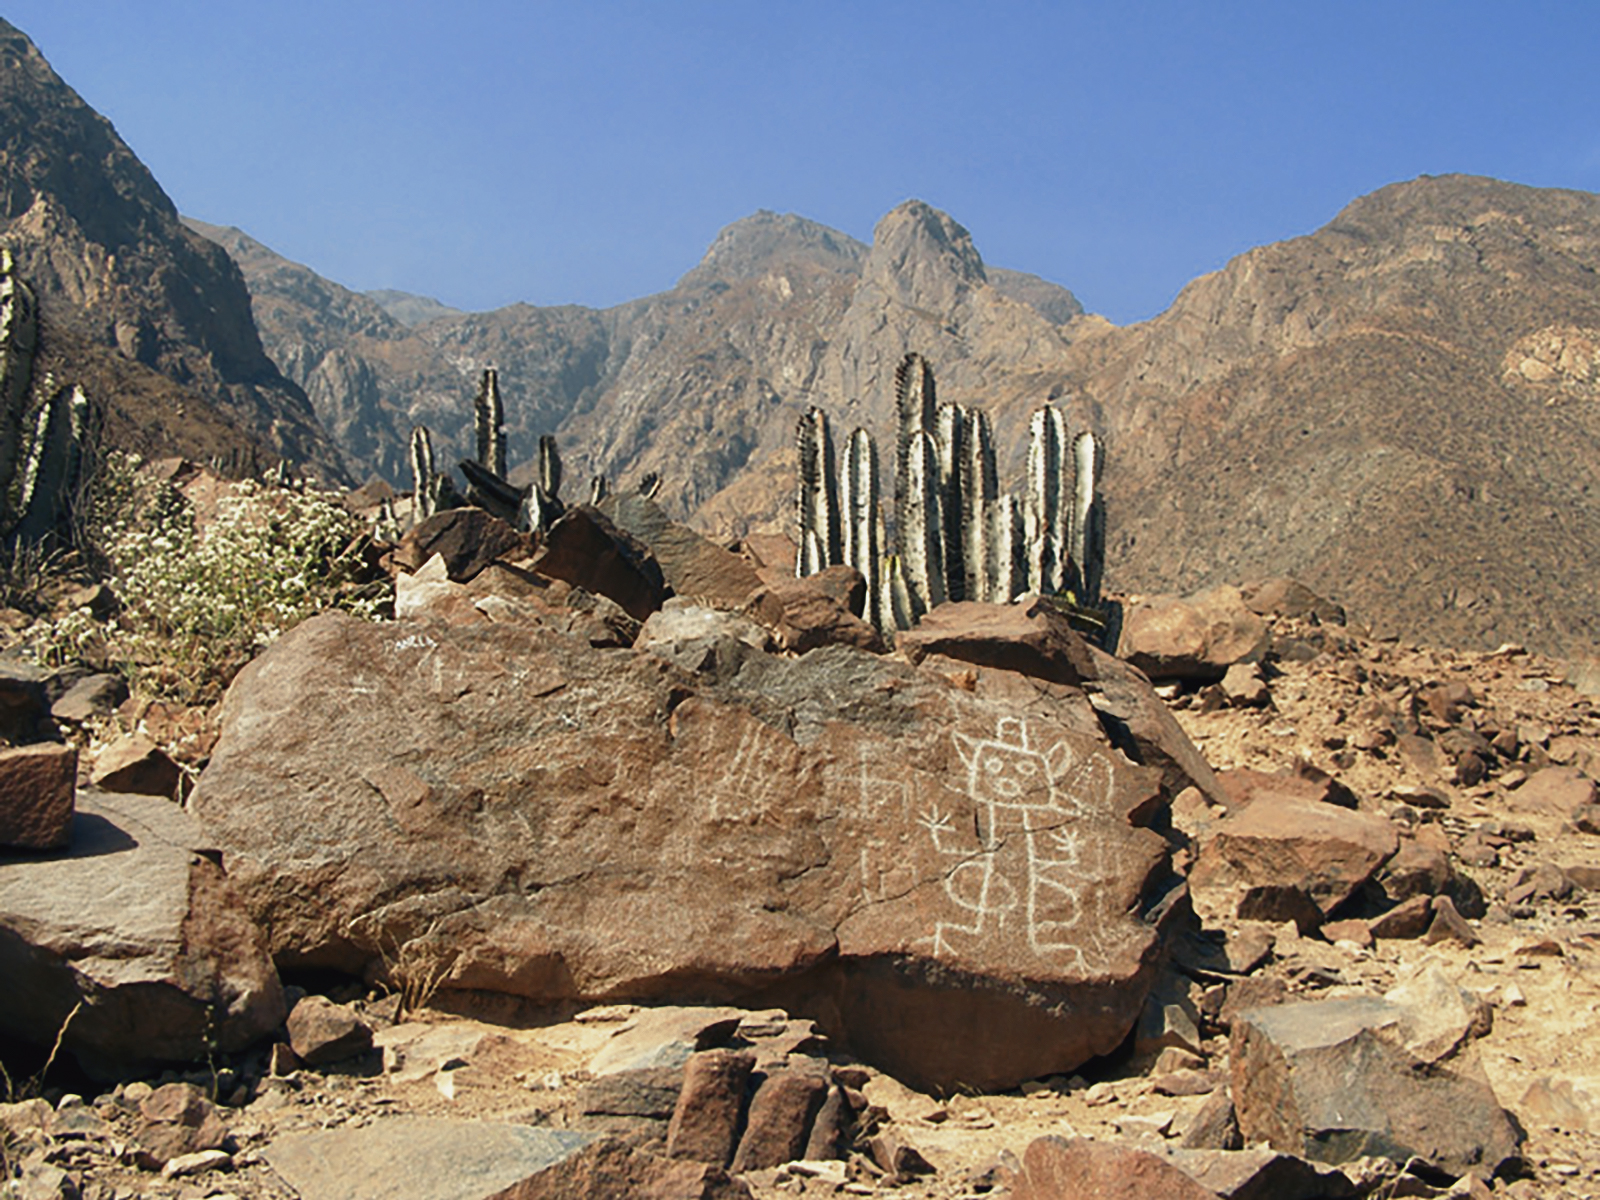 Rock Art Checta Archaeological Archaeology Site of Canta Lima Peru South America